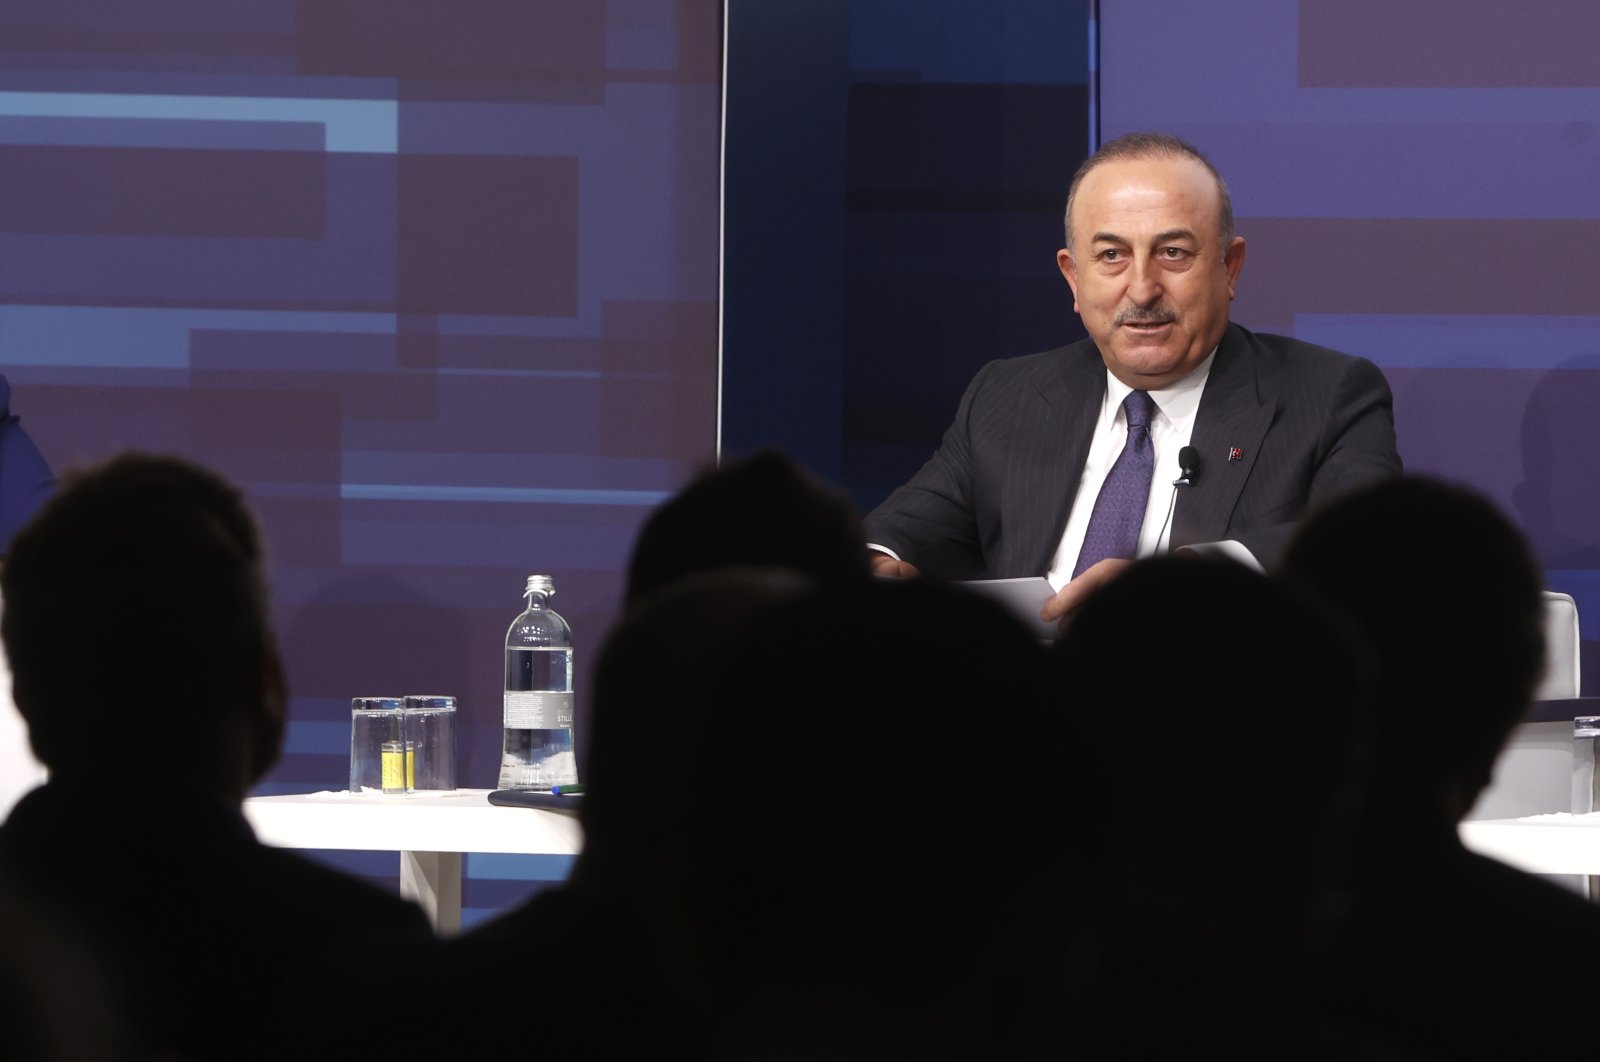 Foreign Minister Mevlüt Çavuşoğlu is seen at the 8th Edition of the Mediterranean Dialogues Conference in Rome, Italy, Dec. 2, 2022 (AA Photo)